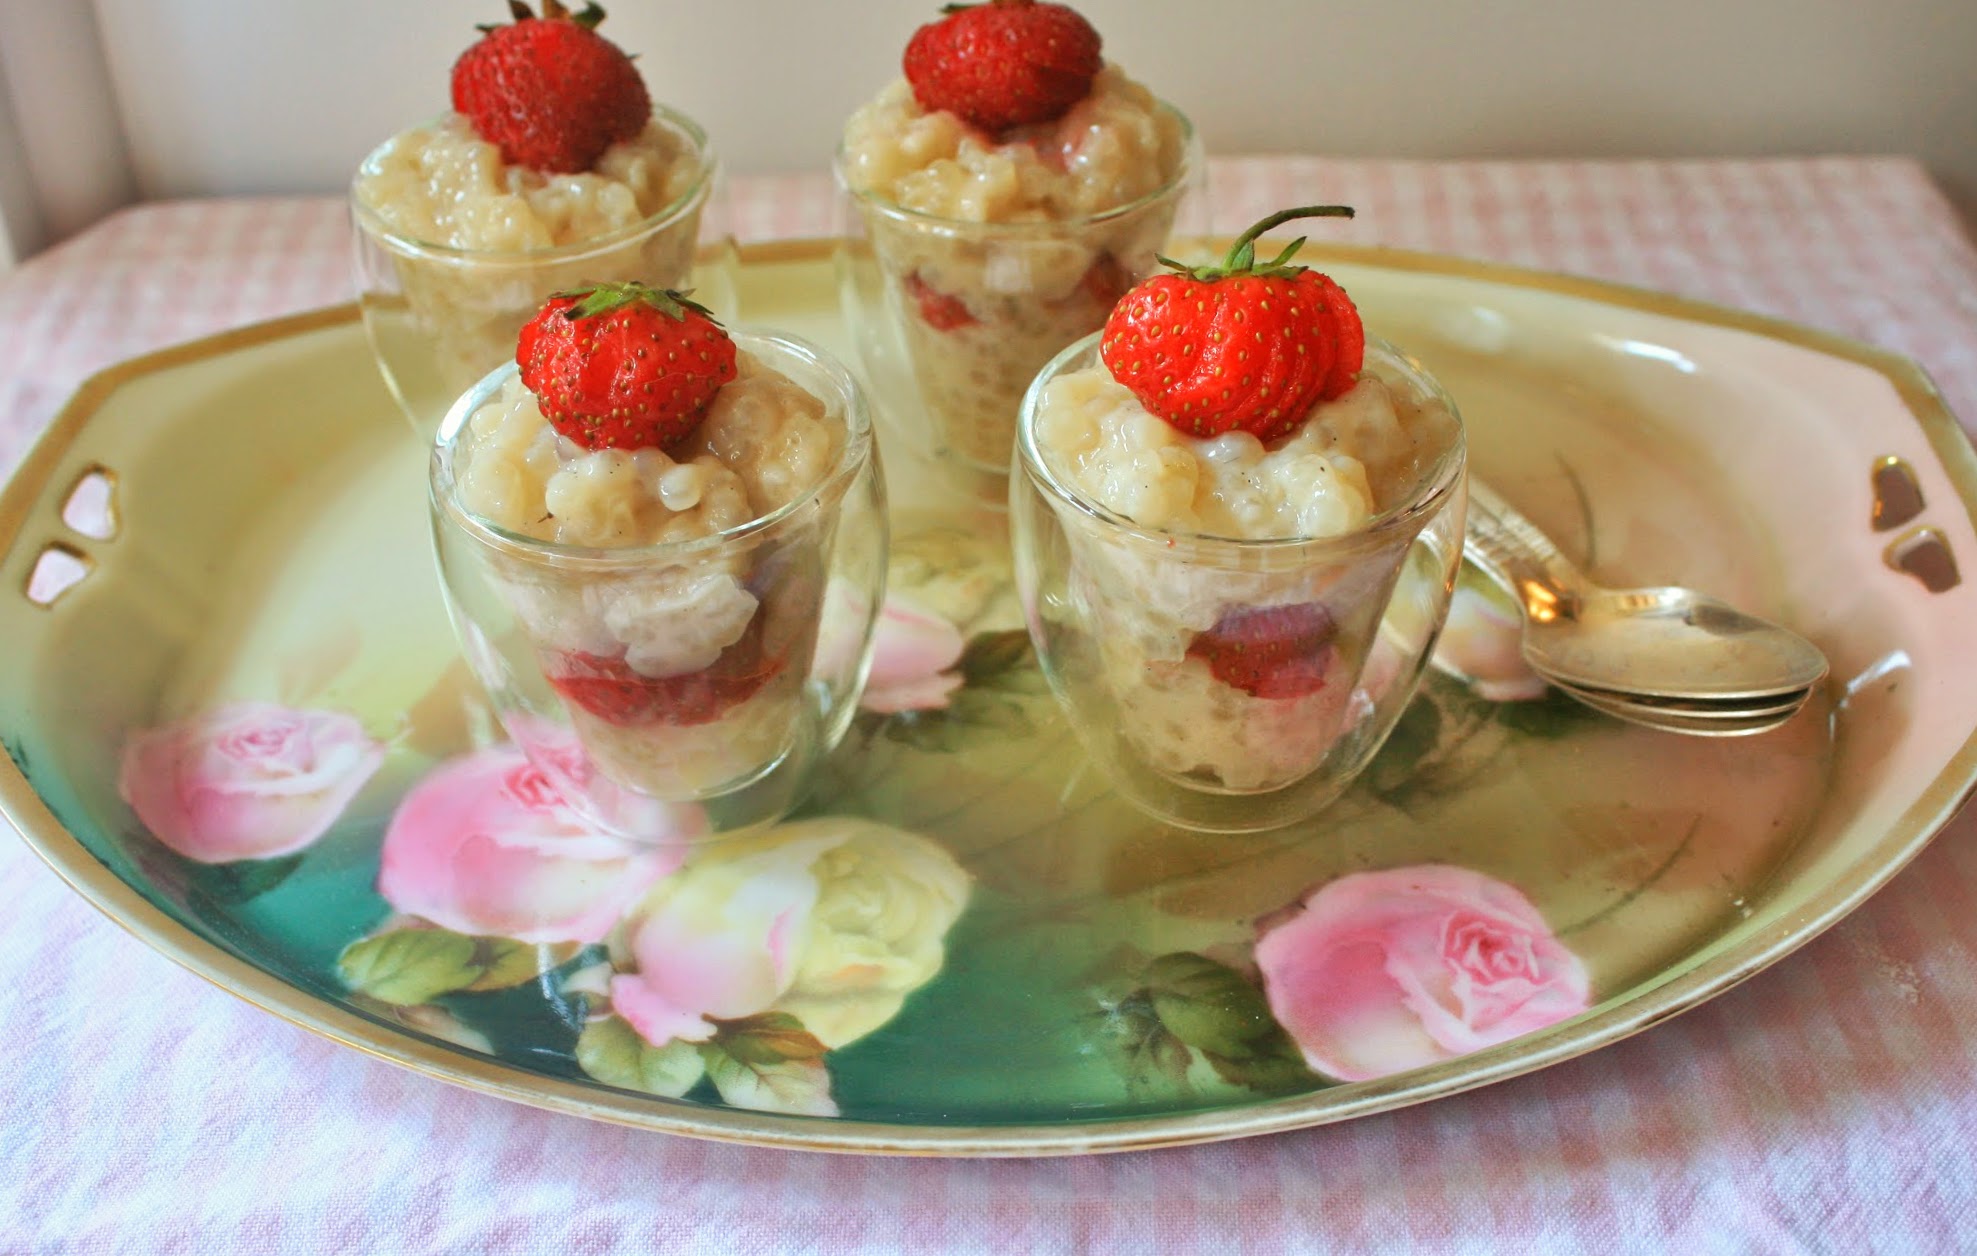 Old Fashioned Tapioca Pudding (Vegan, Gluten-Free and Soy-Free)